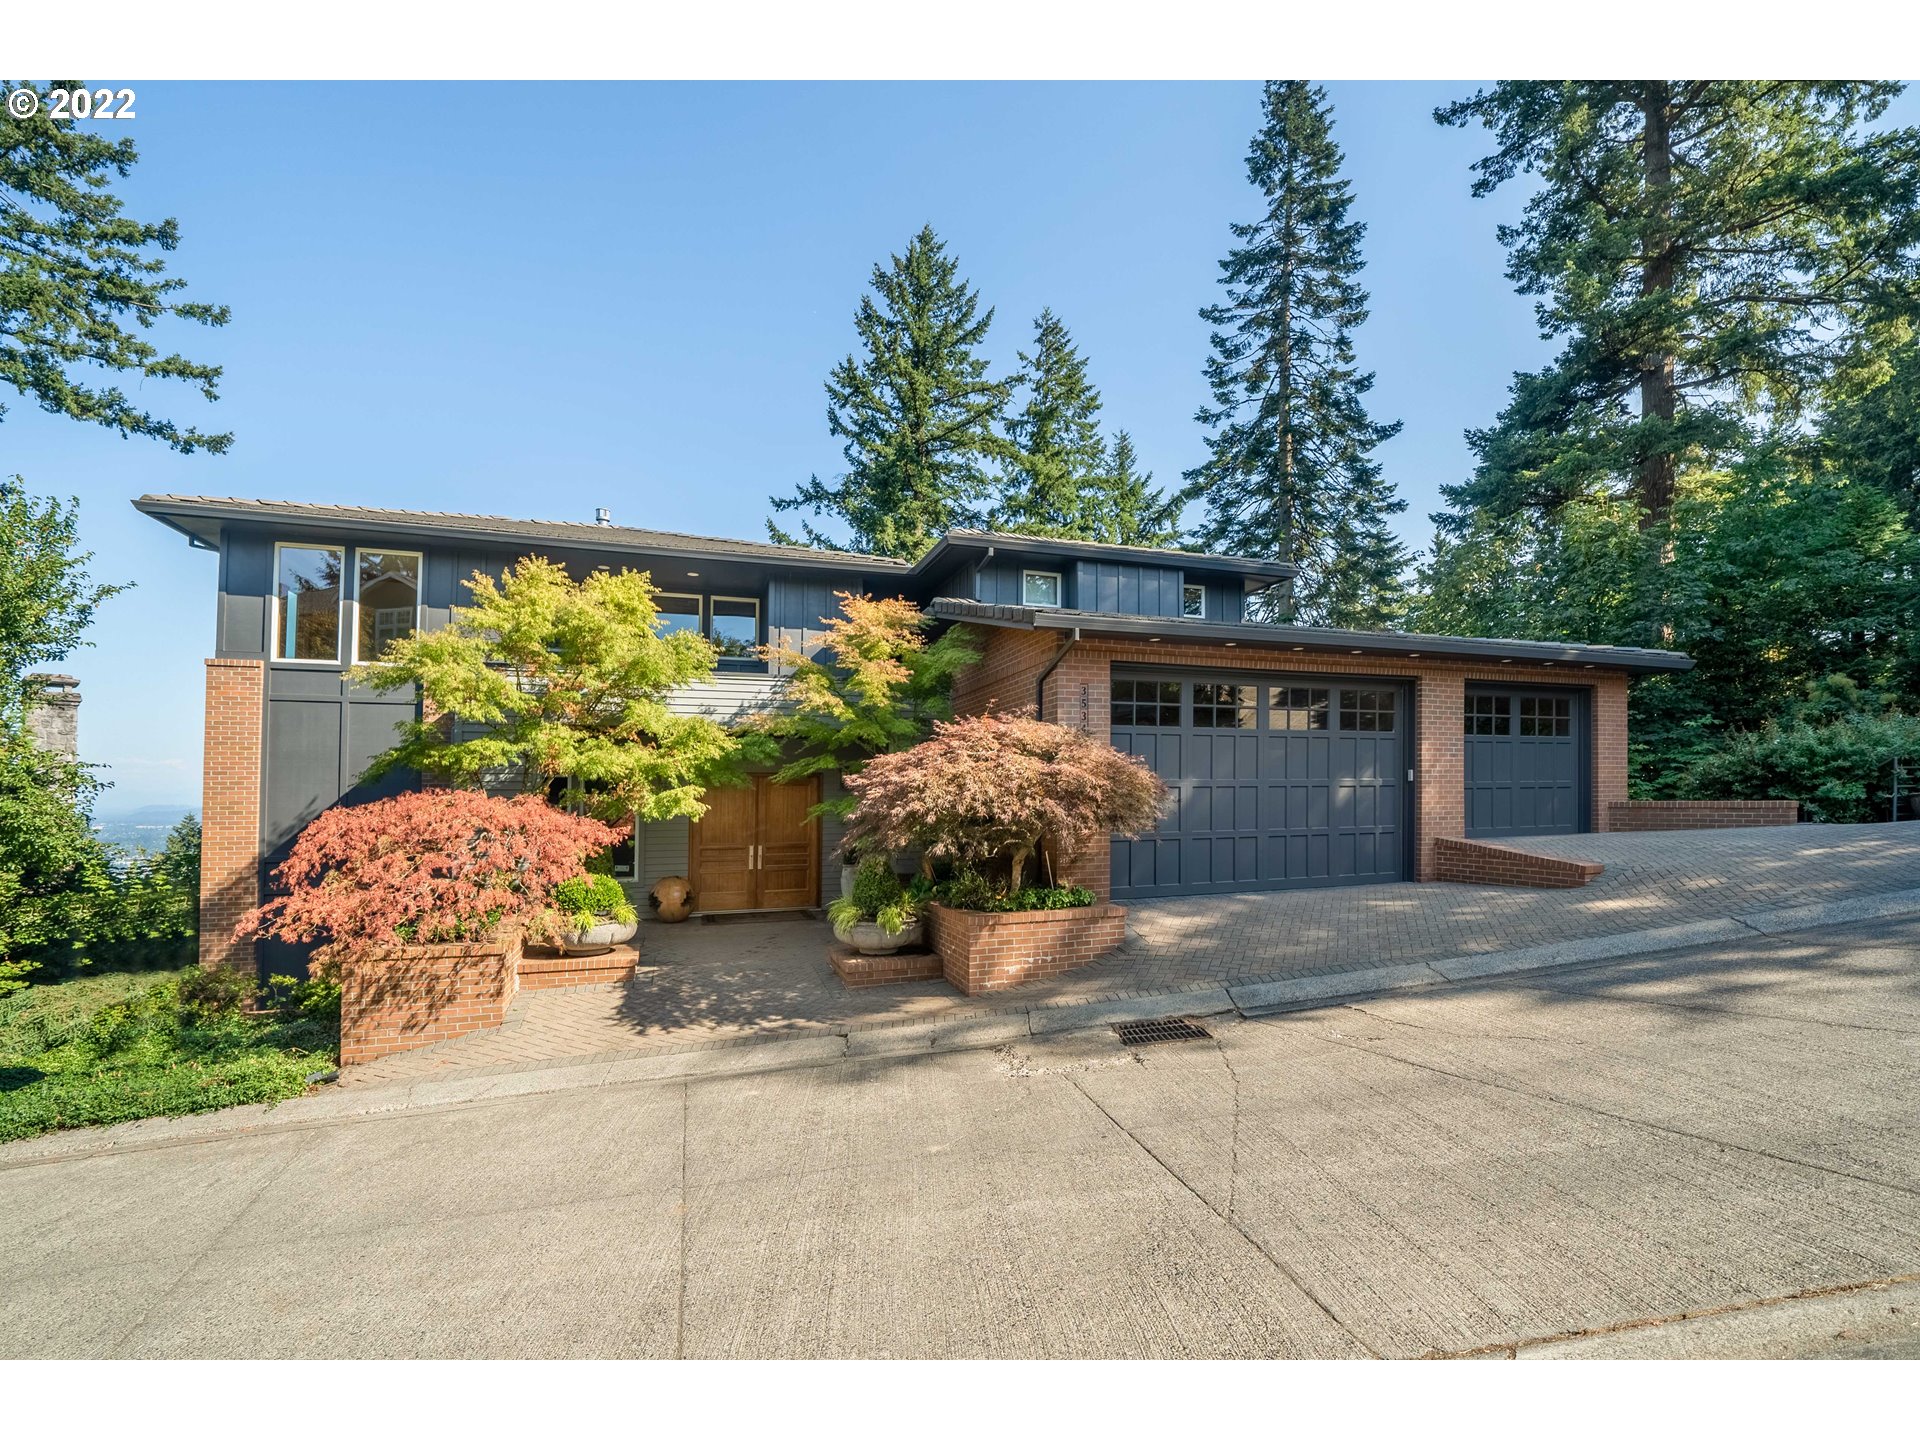 3534 SW GALE AVE, Portland, OR 97239